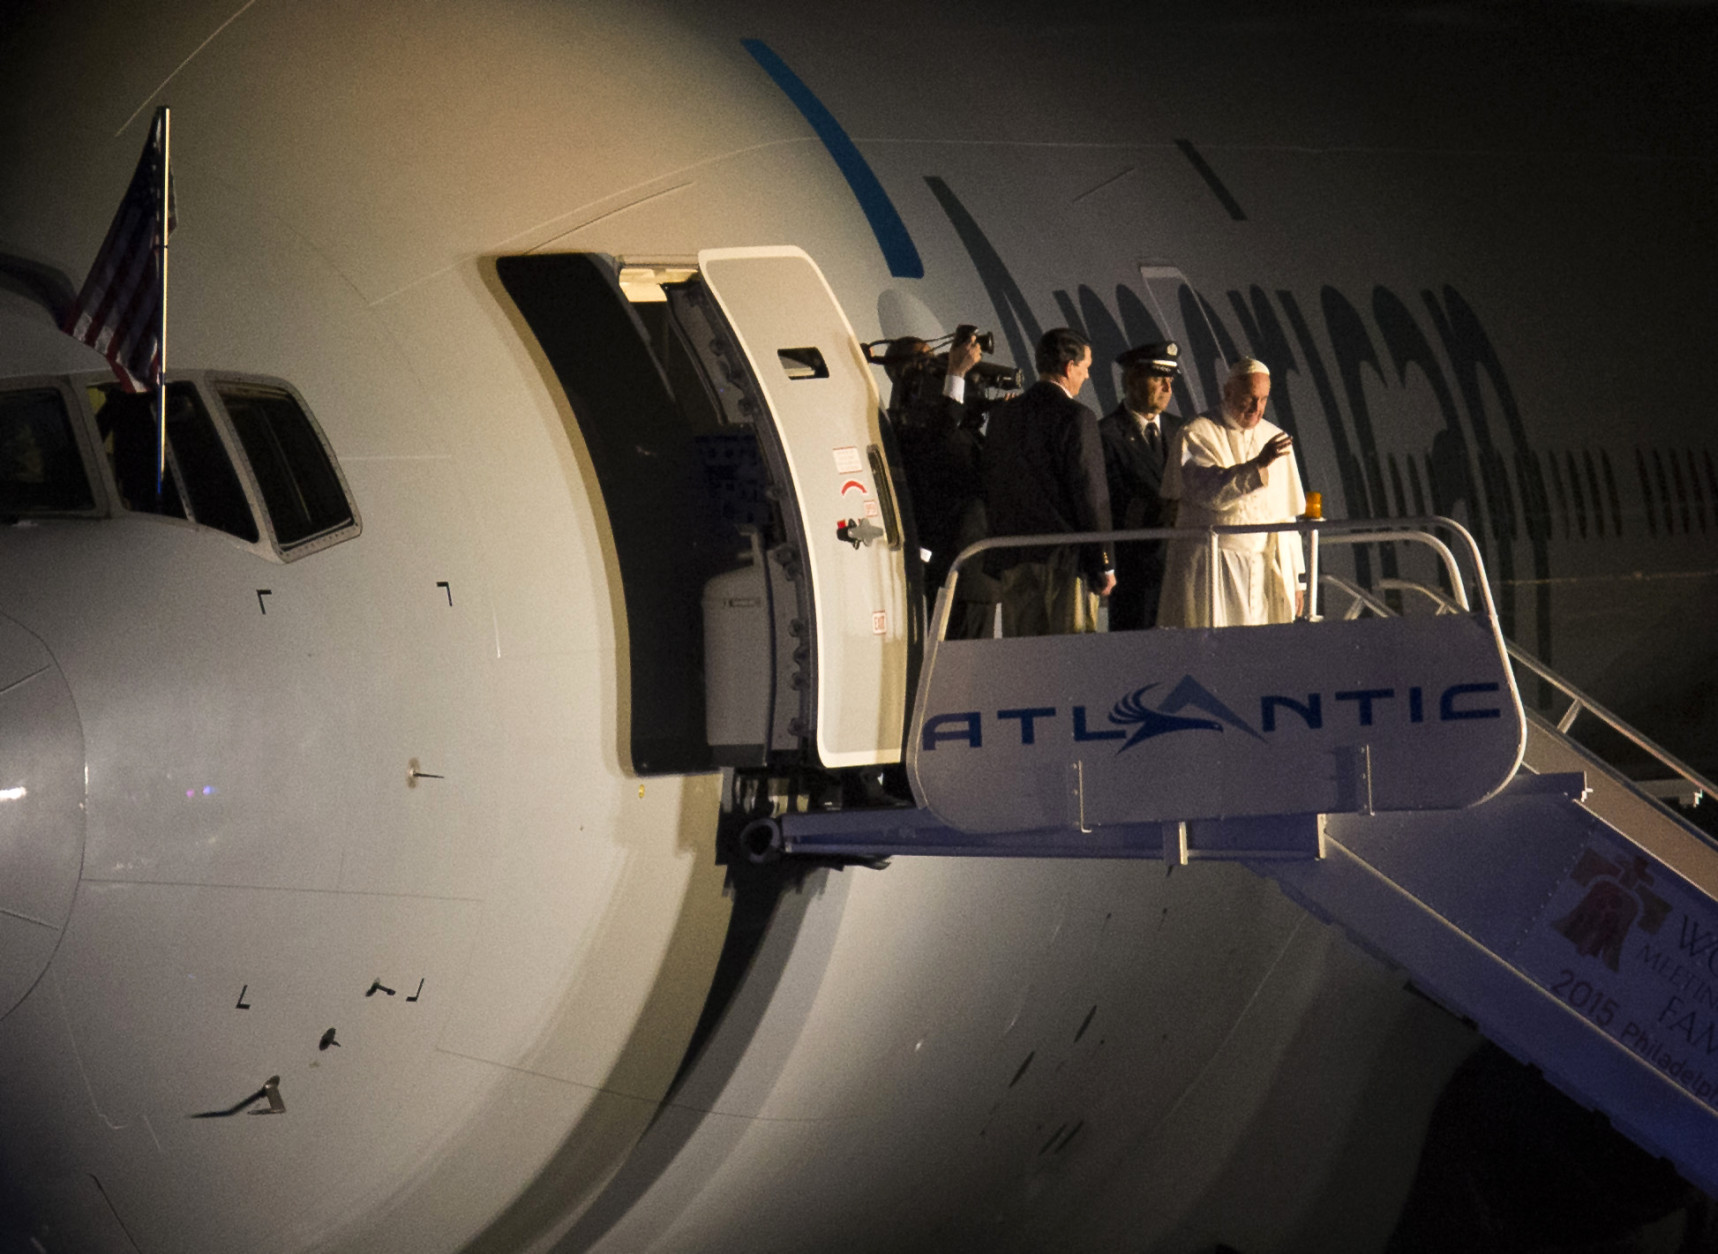 Pope Francis waves to the crowd at Philadelphia International Airport in Philadelphia as he departs for Rome on Sunday, Sept. 27, 2015. Pope Francis wrapped up his 10-day trip to Cuba and the United States on Sunday. (AP Photo/Laurence Kesterson, pool)